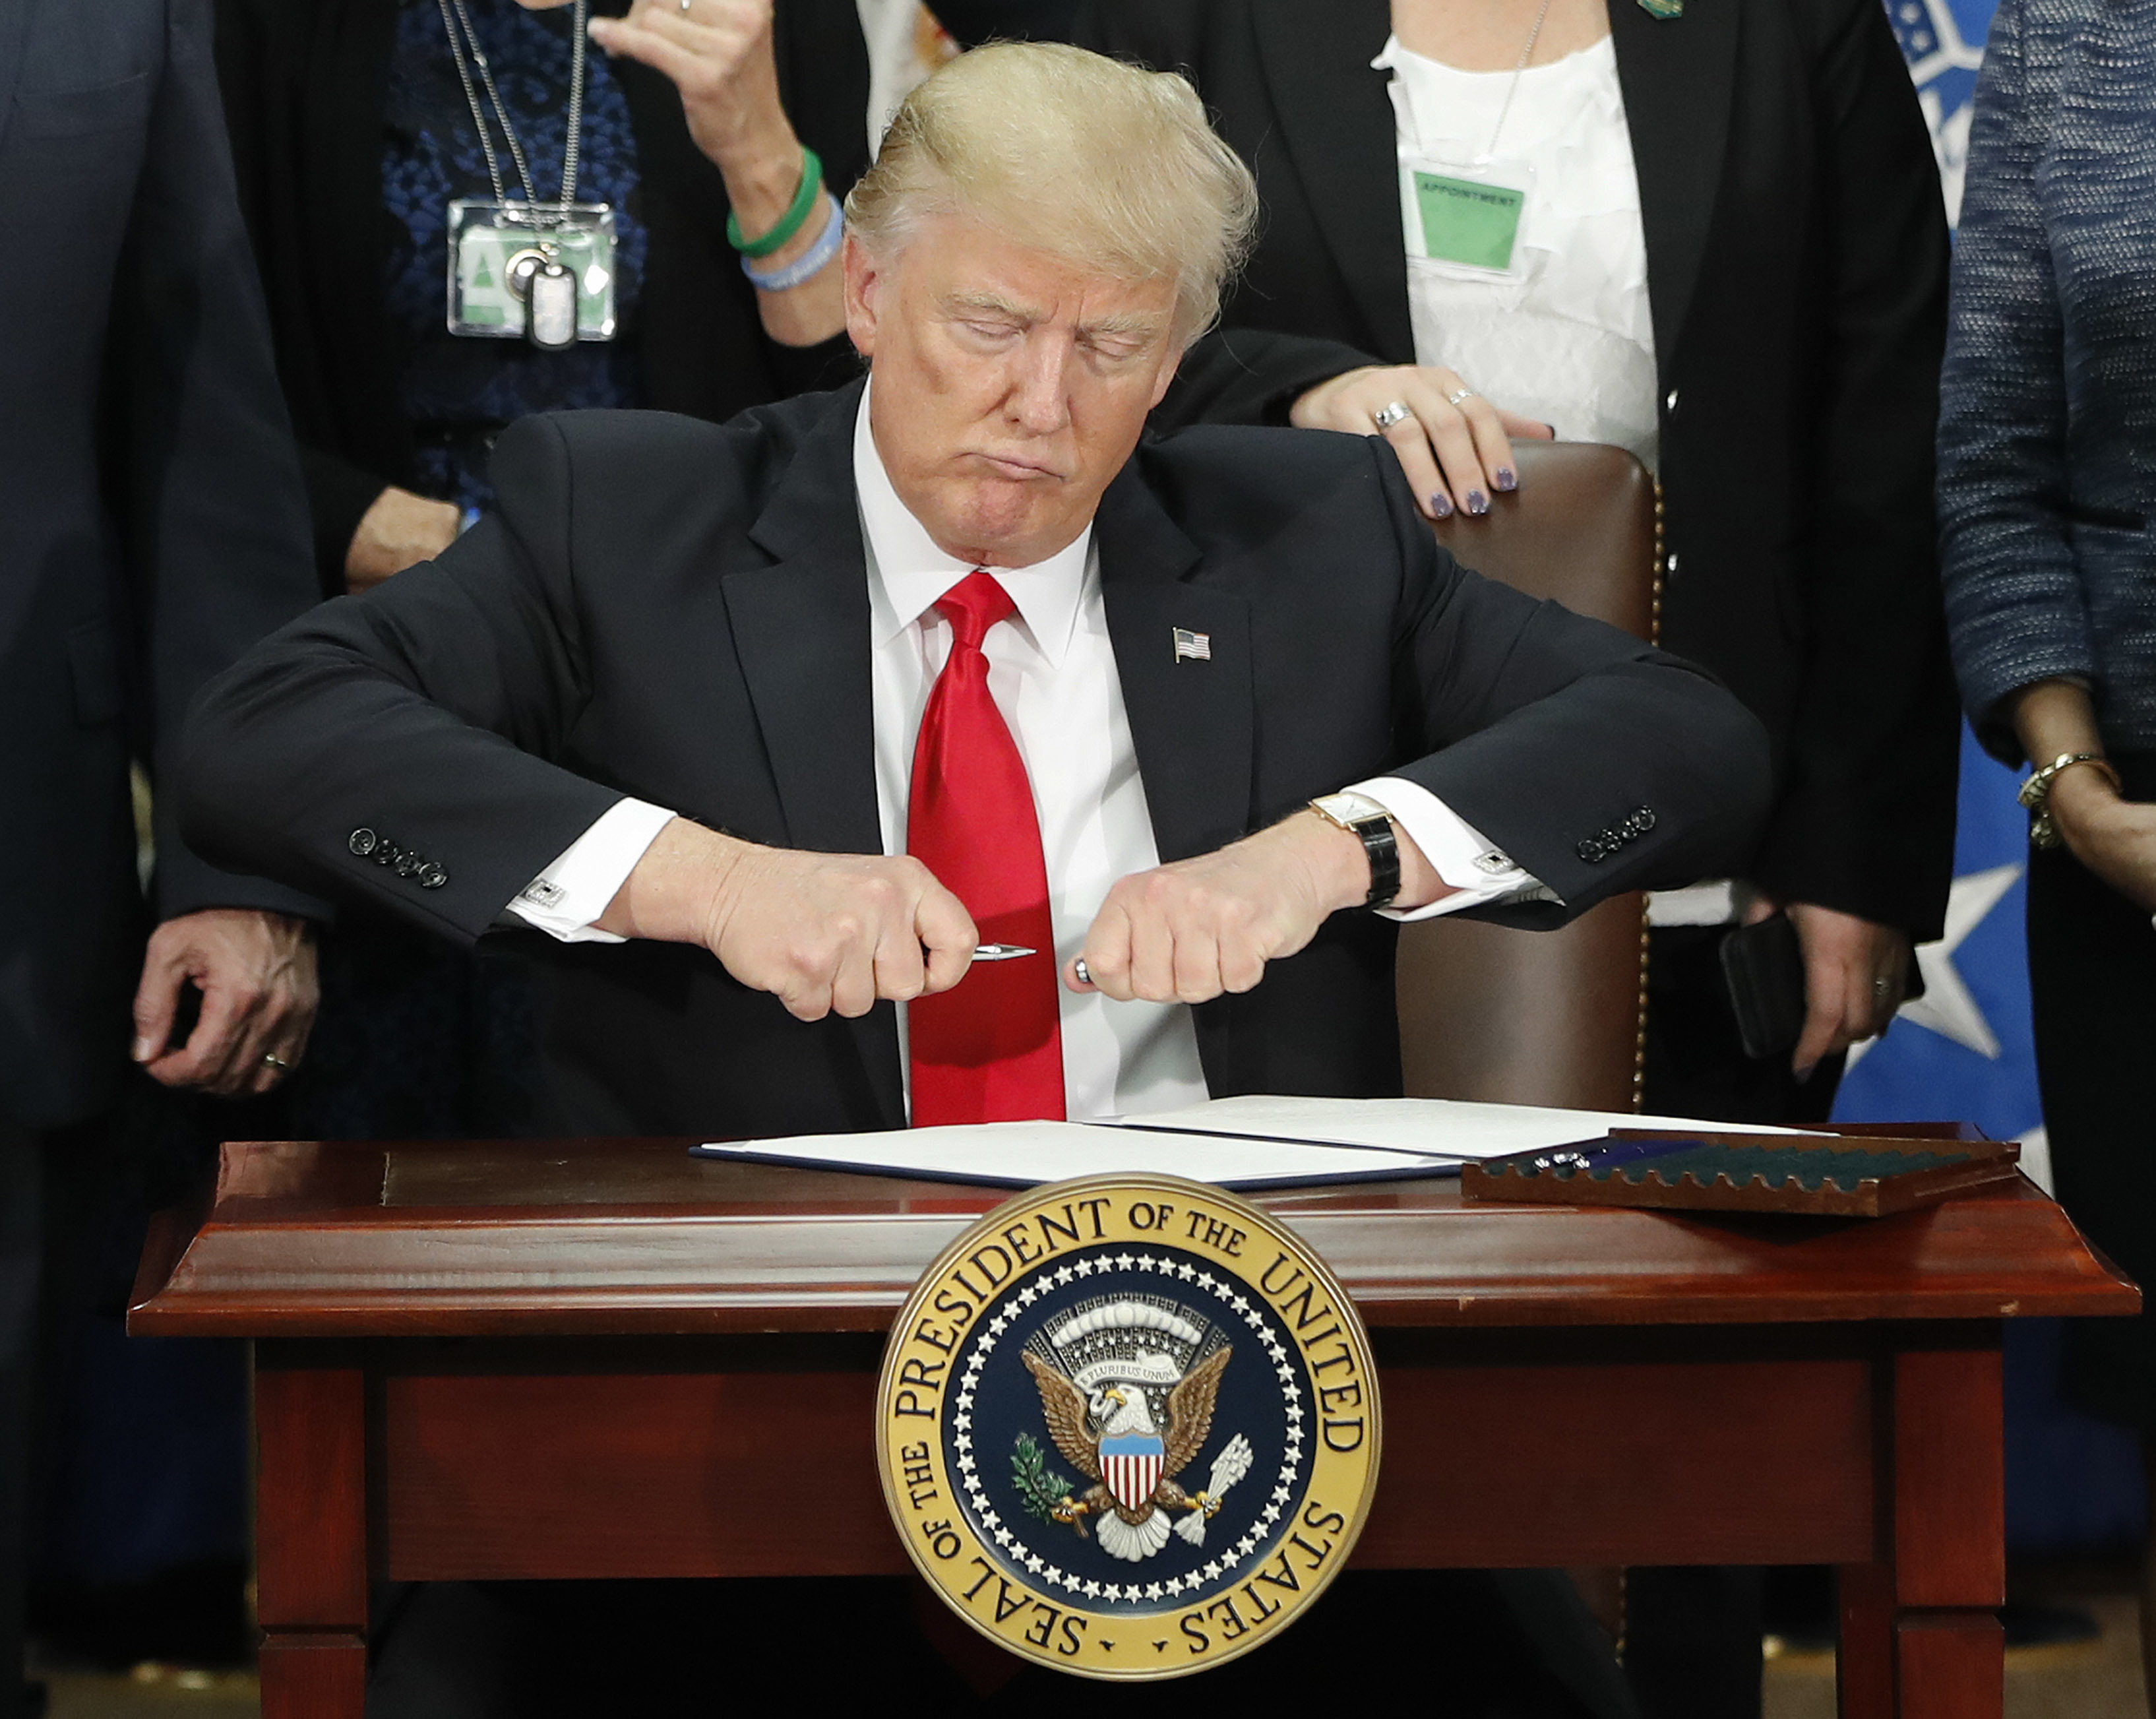 foto : pablo martinez monsivais : president donald trump takes the cap off a pen before signing executive order for immigration actions to build border wall during a visit to the homeland security department in washington, wednesday, jan. 25, 2017. (ap photo/pablo martinez monsivais)